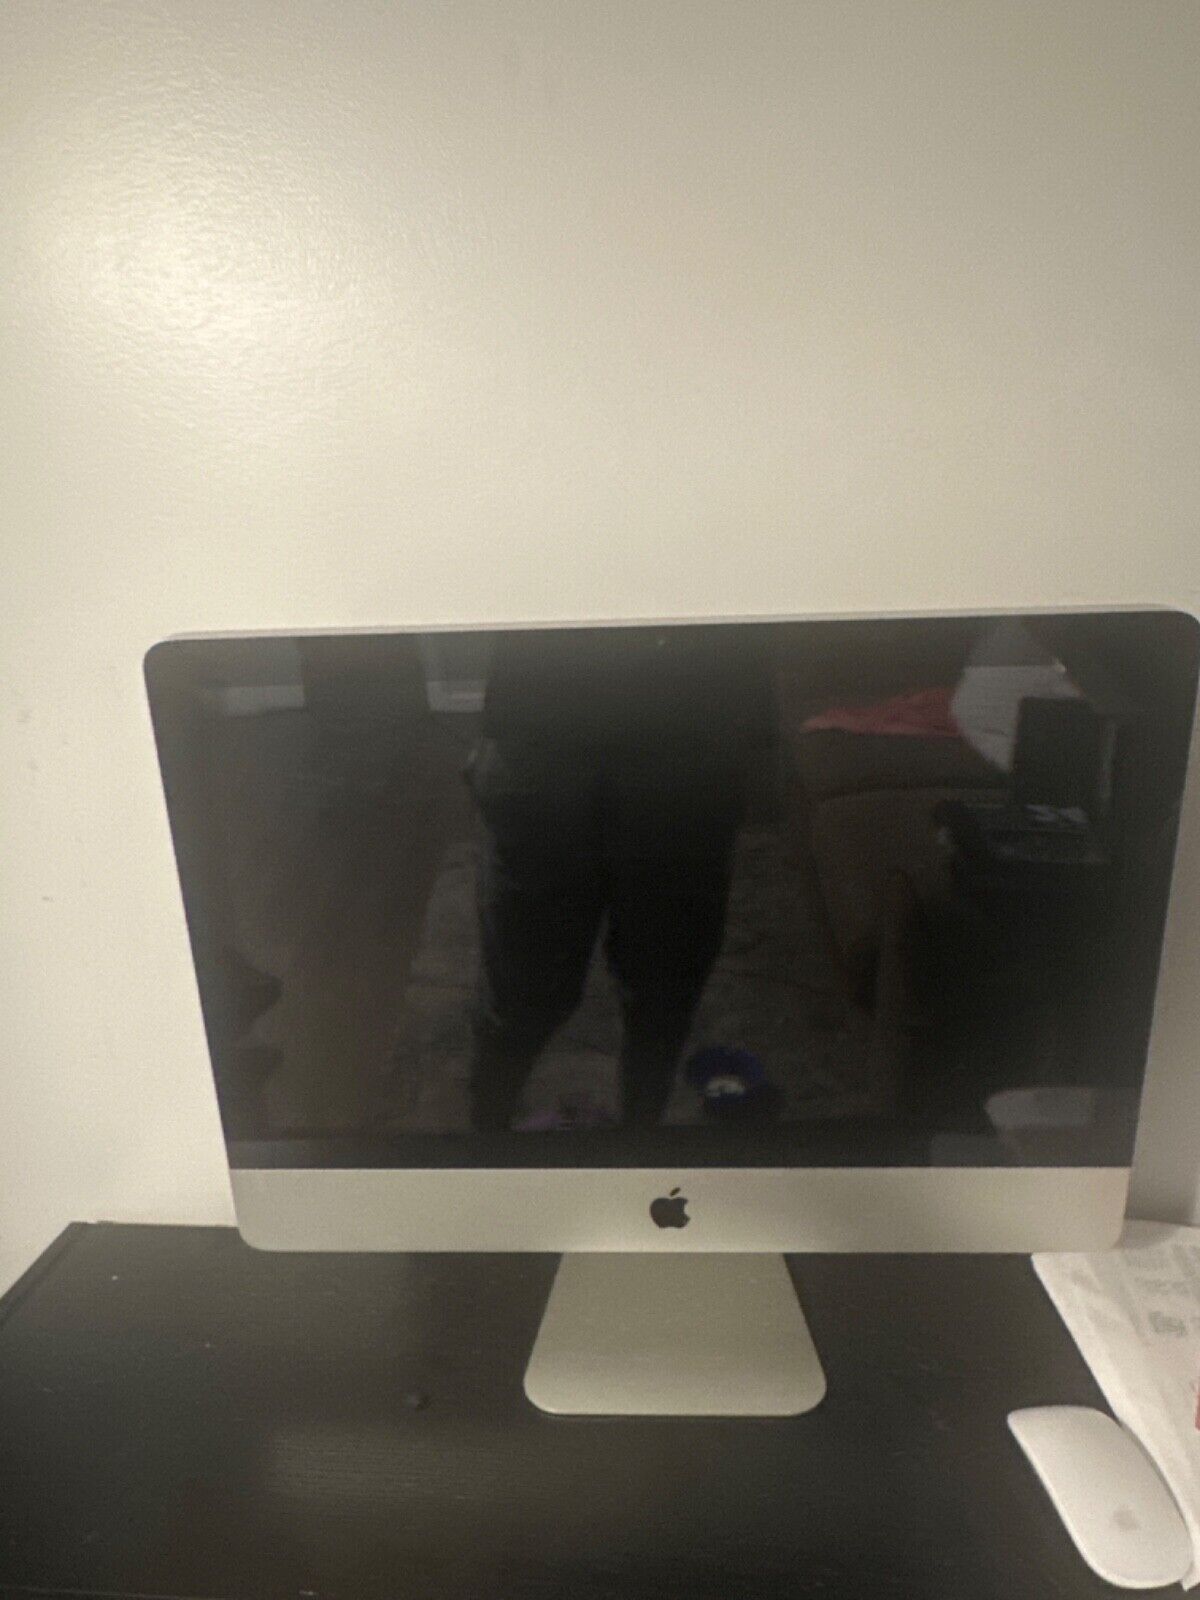 Apple iMac A1311 21.5 inch Desktop With Wireless Mouse- MC508LL/A (July, 2010)